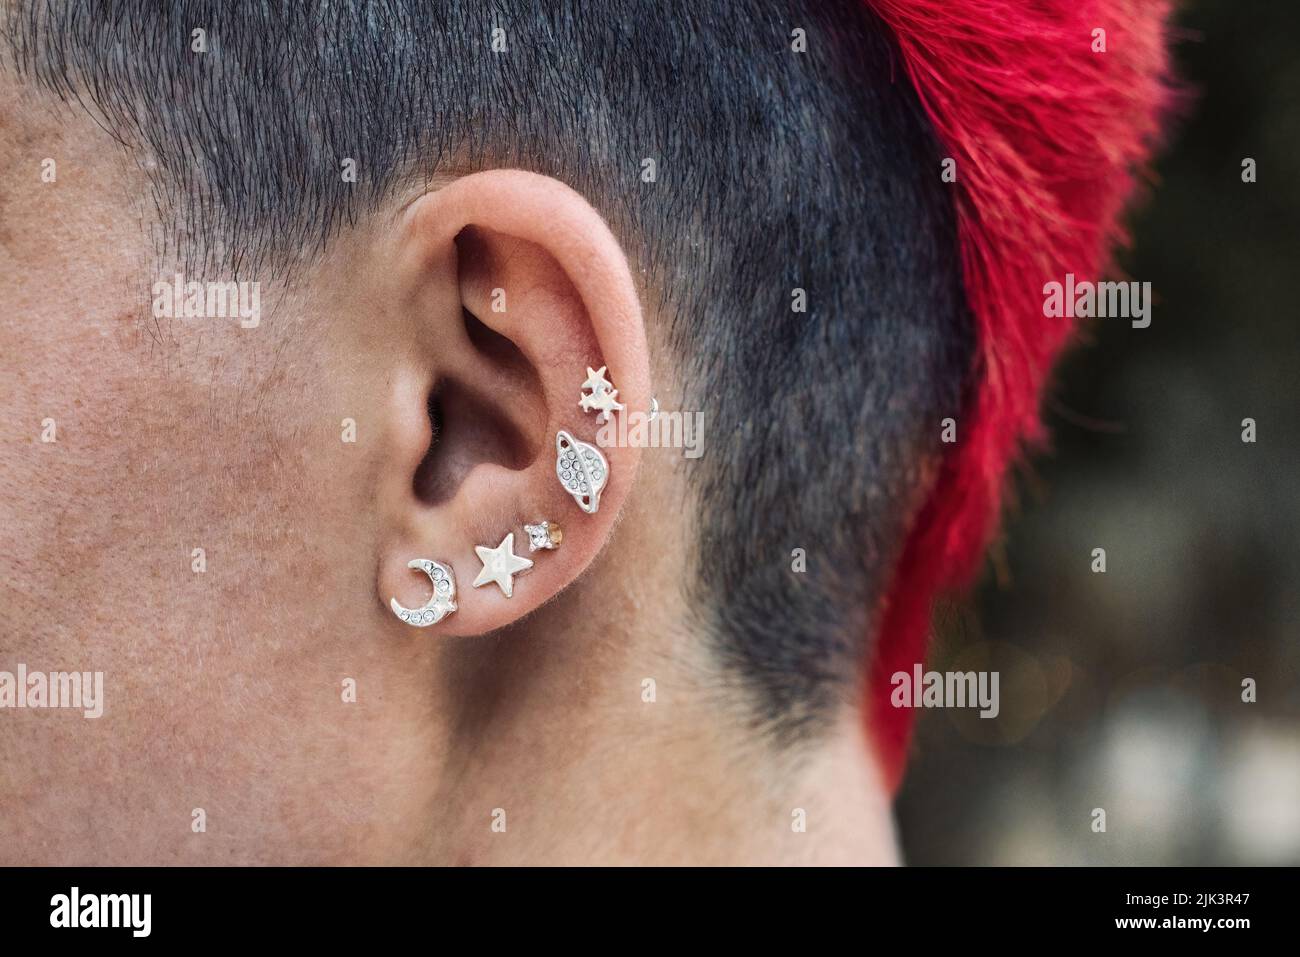 Closeup of a female punk's ear with silver piercings and a bright red dyed mohawk personal hair style Stock Photo